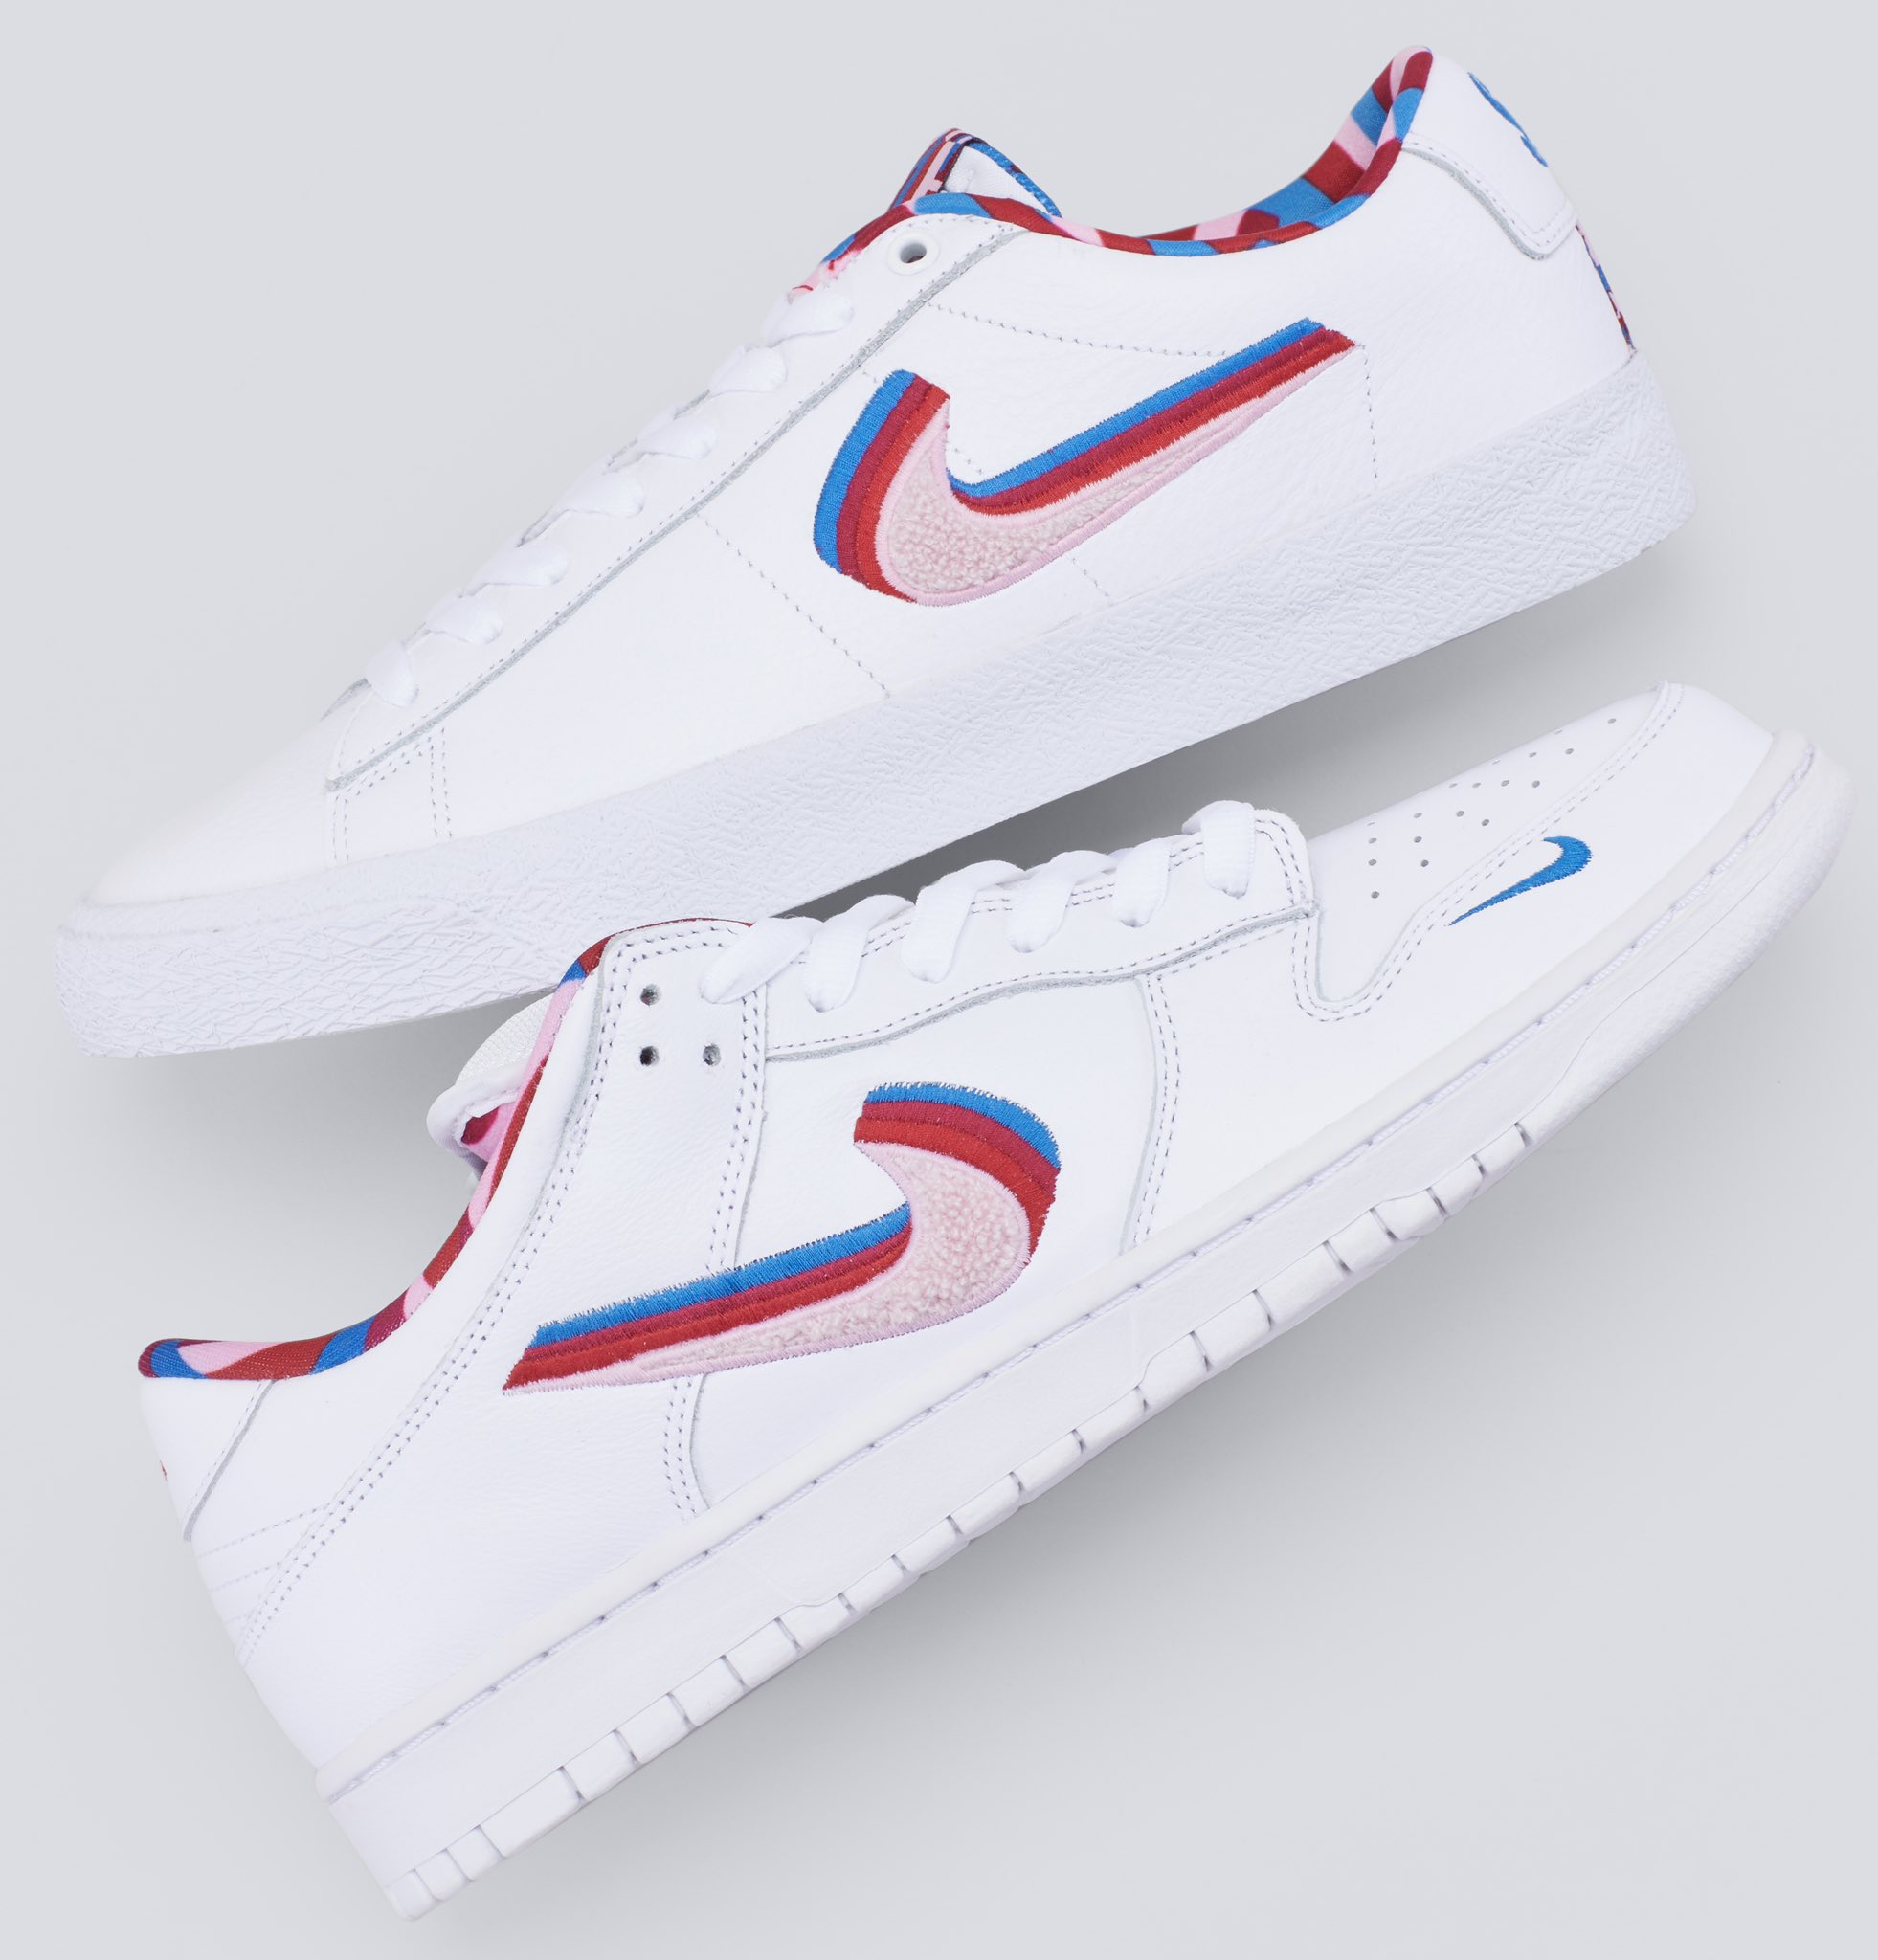 StockX on Twitter: "Featuring textured swooshes in a familiar palette, the Parra Nike SB Blazer Low and Dunk Low are a playful take on two classic silhouettes. Shop now: https://t.co/Zu57TX5Ugh https://t.co/5Ox7AvHARN"